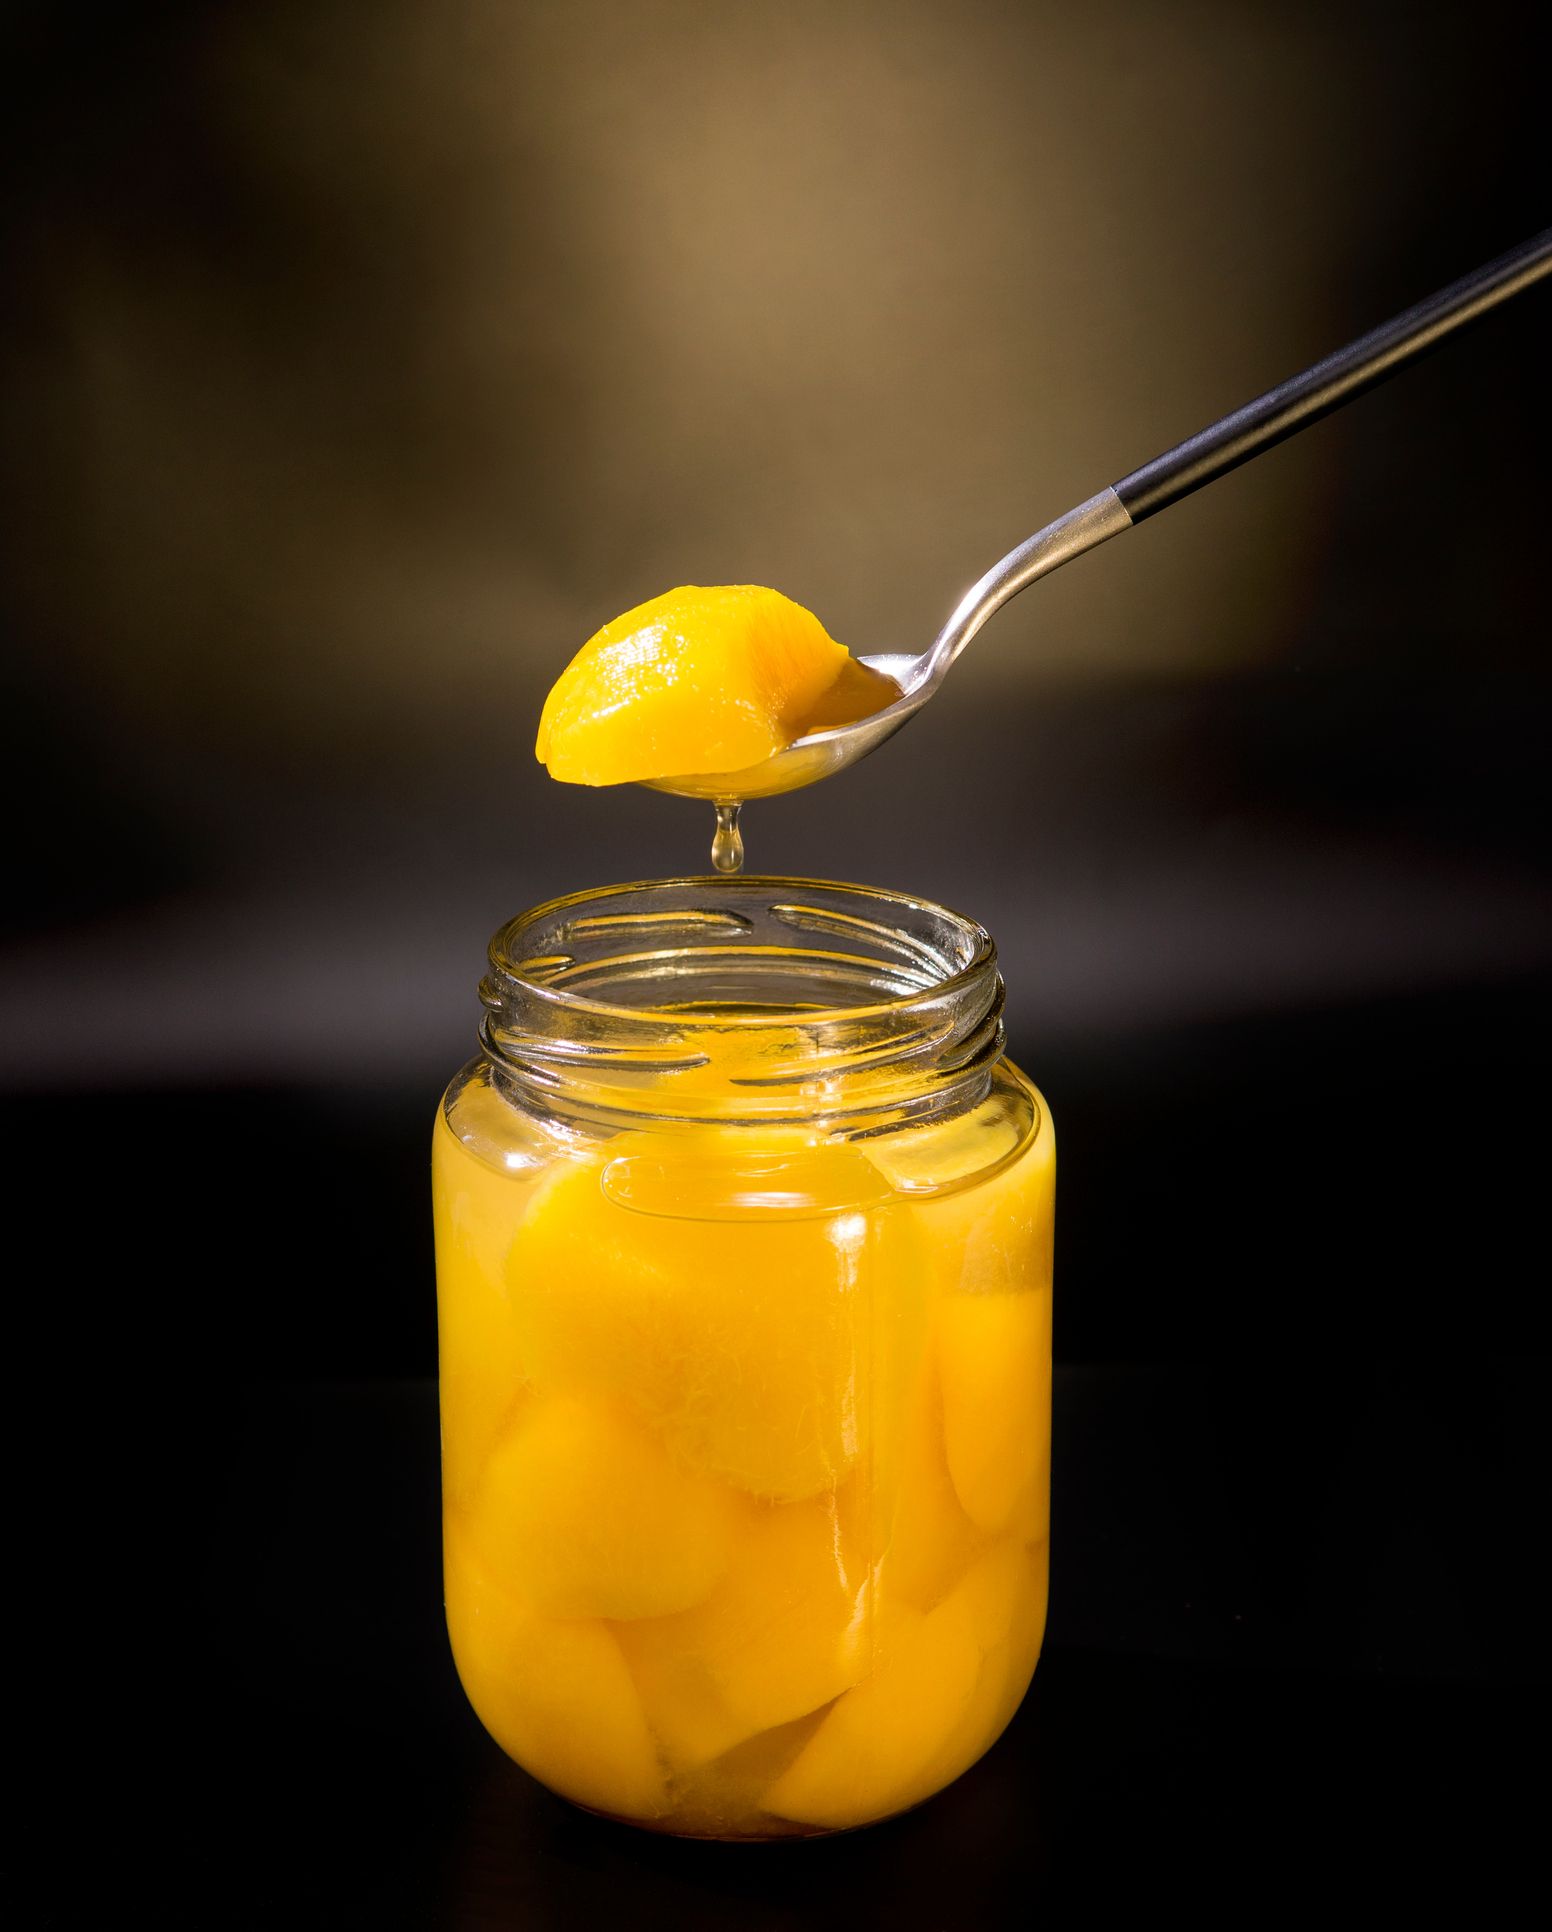 Close-Up Of Canned Peaches In Jar